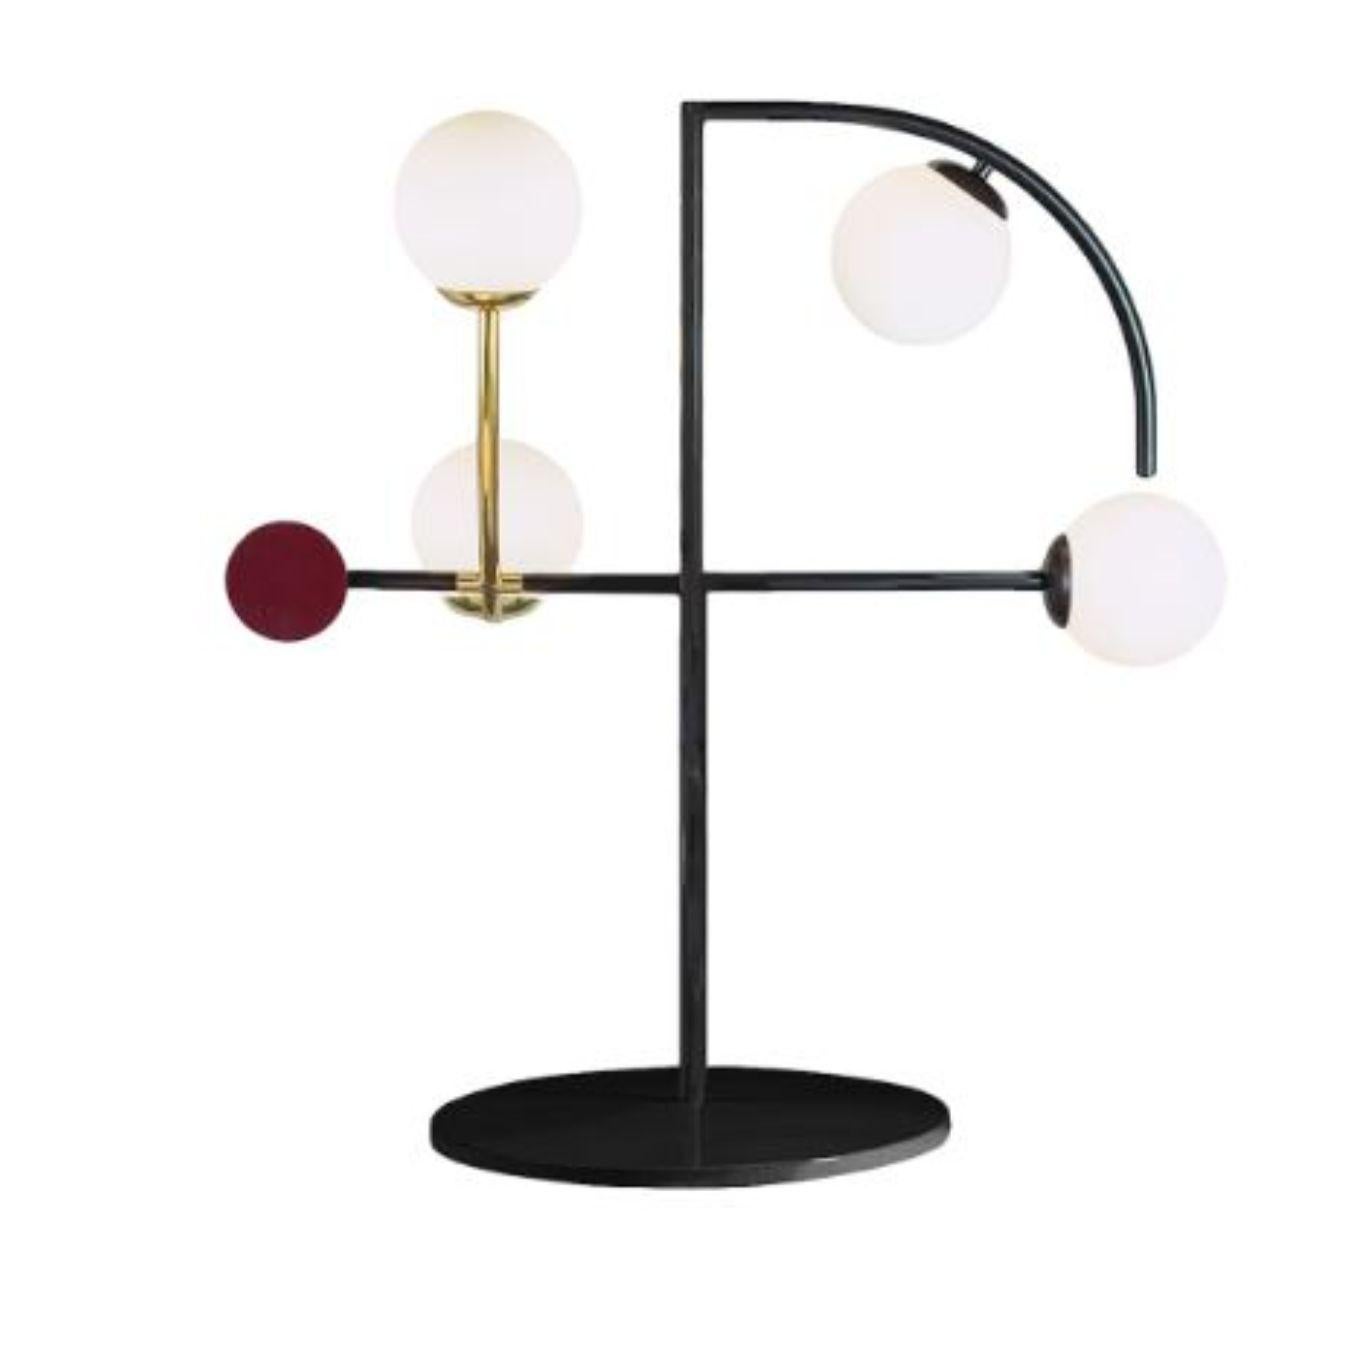 Taupe Helio table lamp by Dooq
Dimensions: W 50 x D 25 x H 67 cm
Materials: lacquered metal, brass/nickel.
Also available in different colors and materials. 

Information:
230V/50Hz
4 x max. G9
4W LED

120V/60Hz
4 x max. G9
4W LED

All